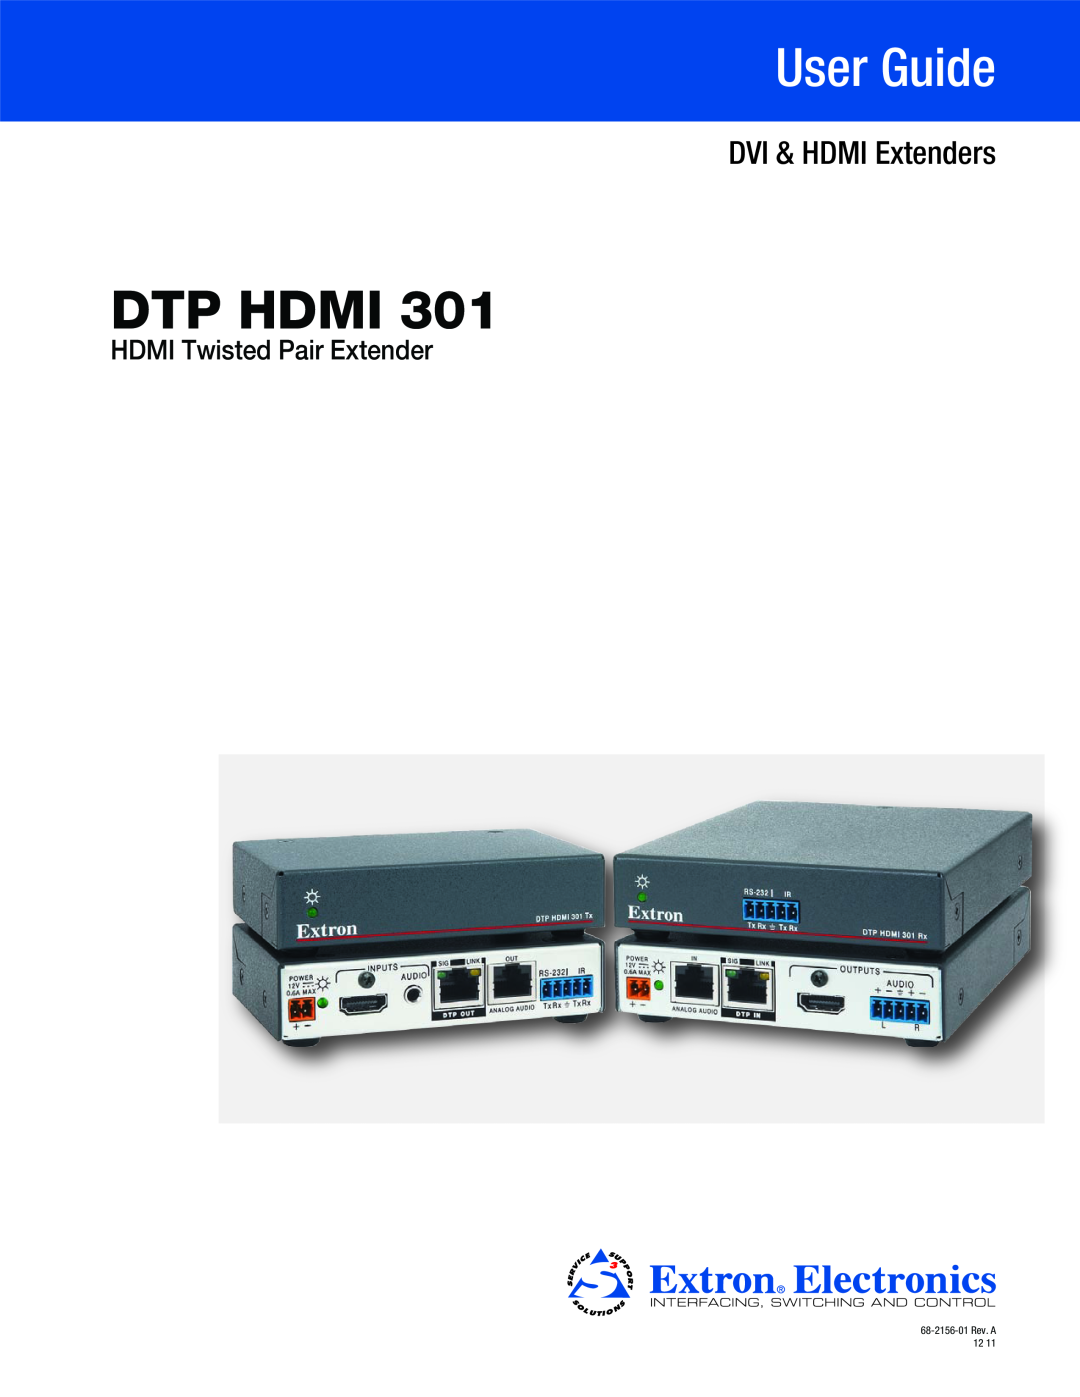 Extron electronic DTP HDMI 301 manual Dtp Hdmi, User Guide, DVI & HDMI Extenders, HDMI Twisted Pair Extender 